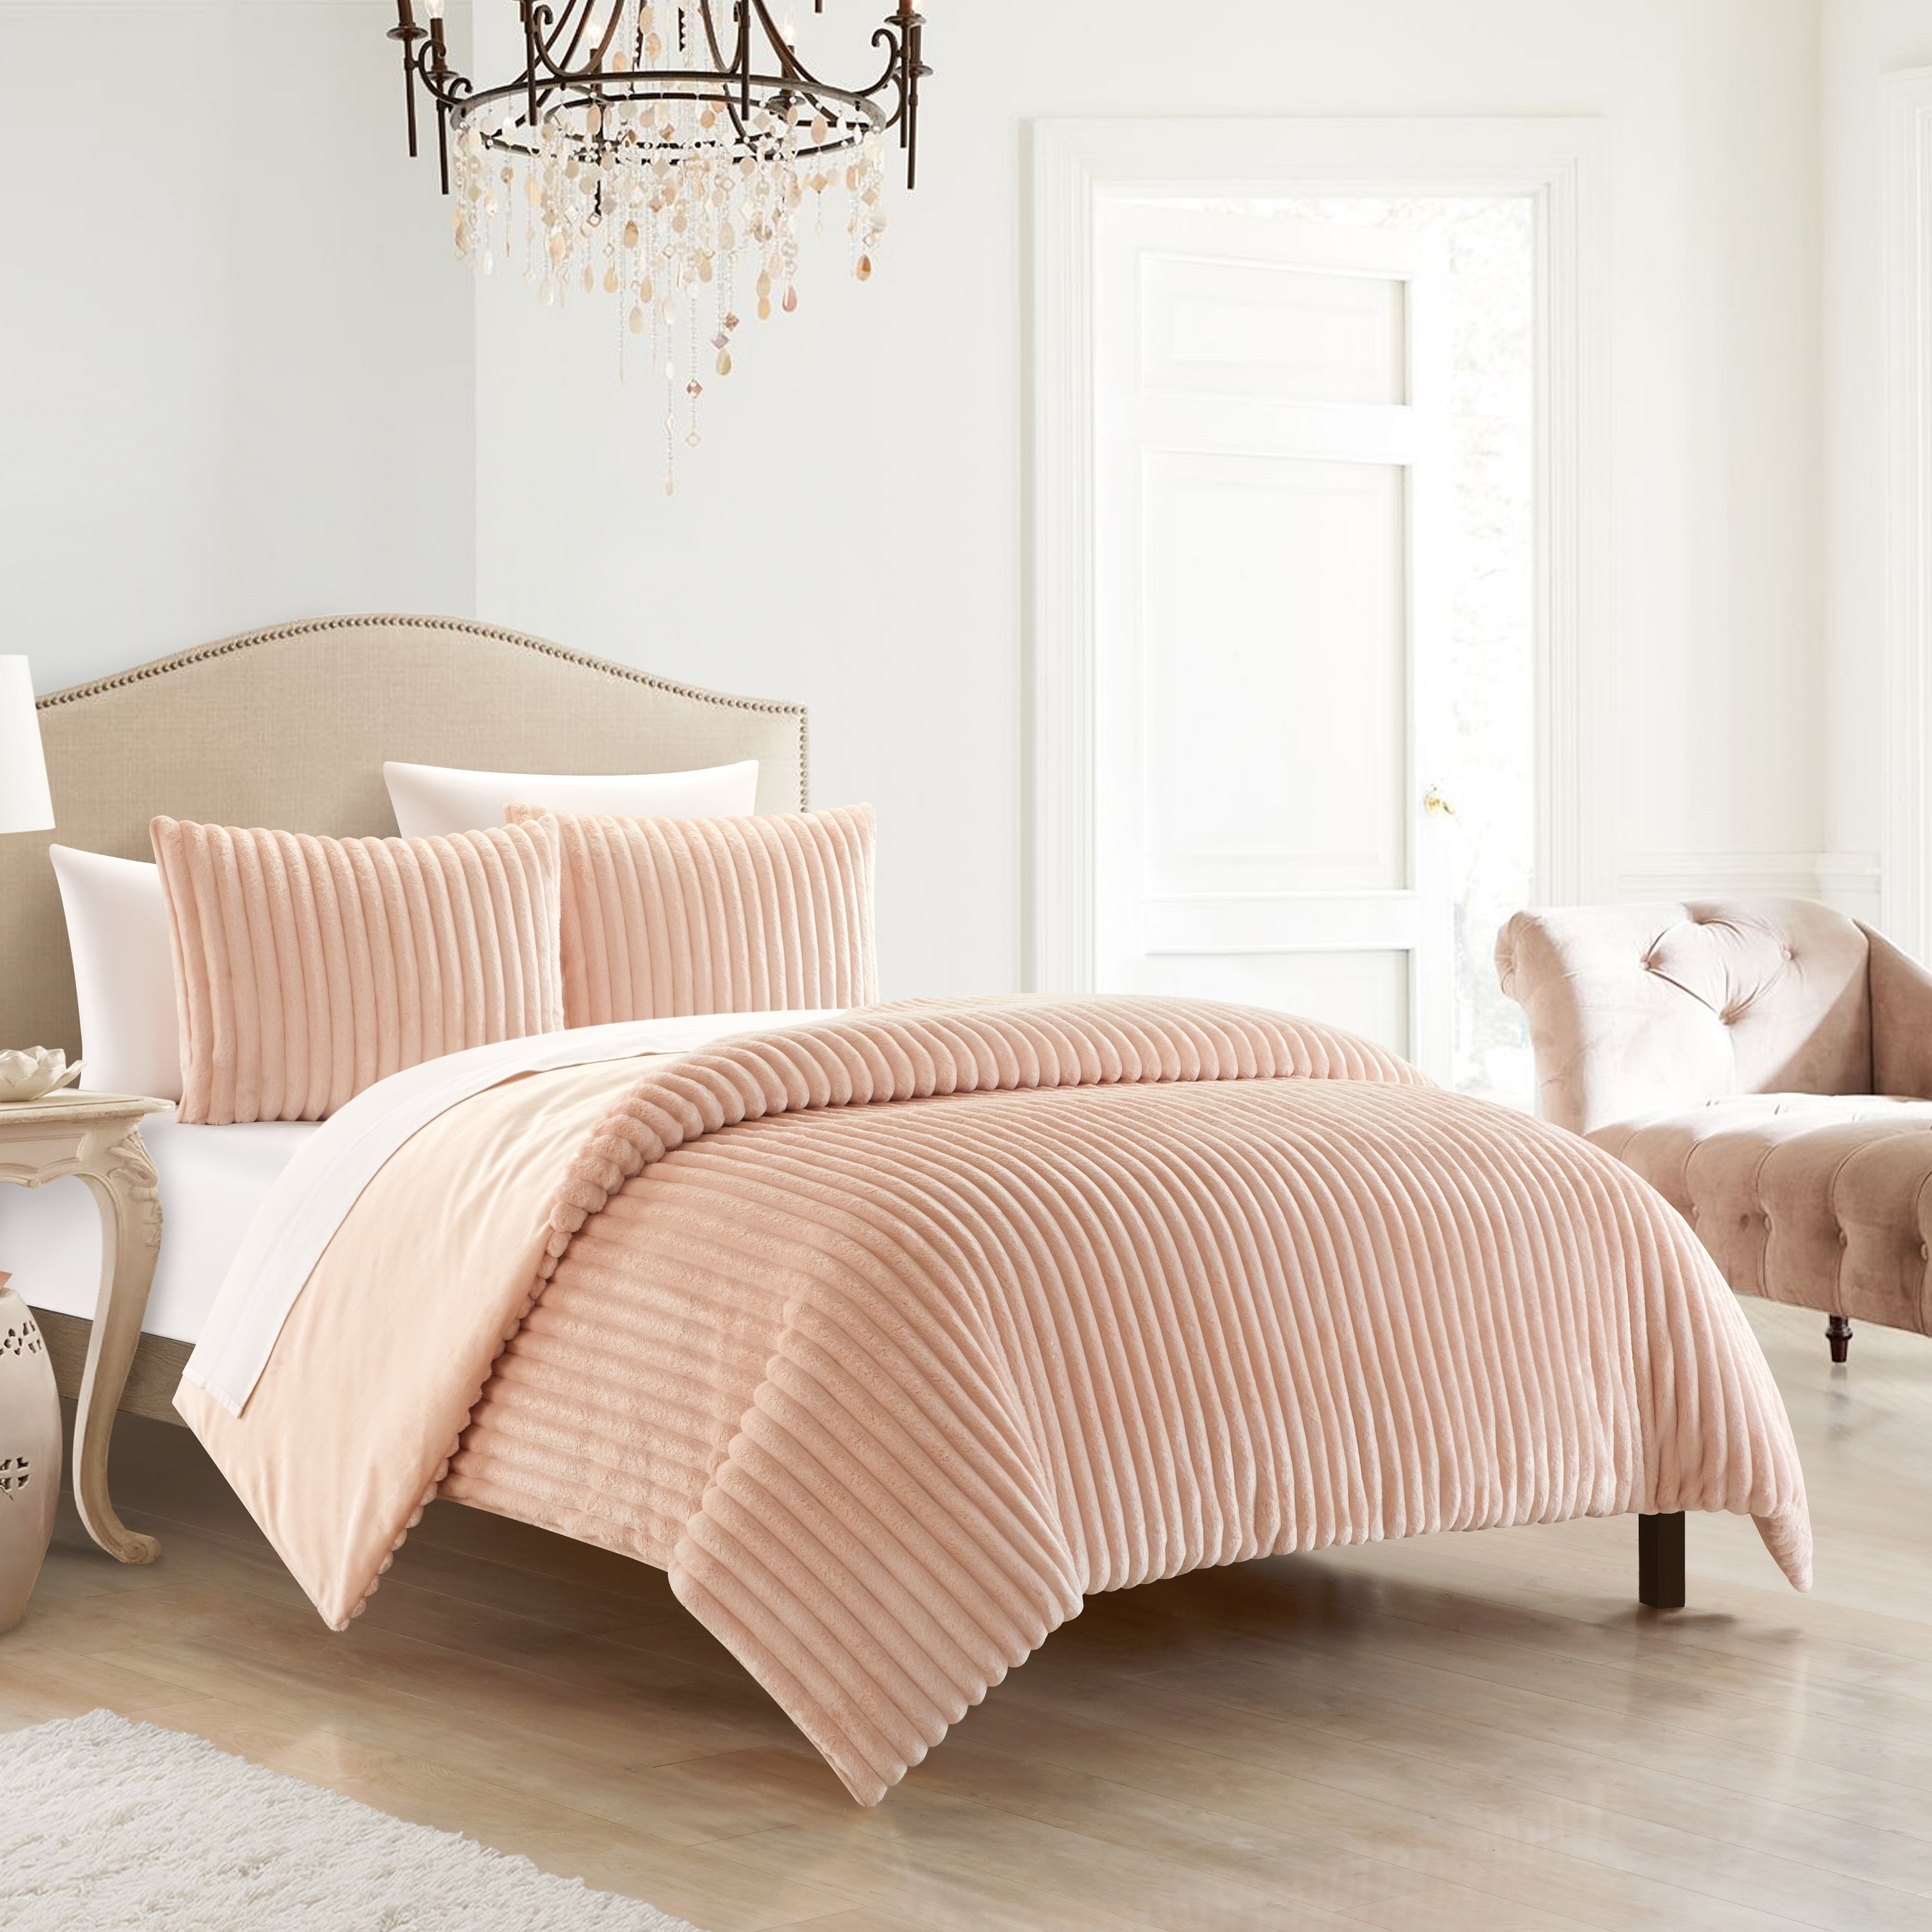 Pabrico 3 Or 2 Piece Comforter Set Microplush Channel Quilted - Blush, Queen - 3 Piece